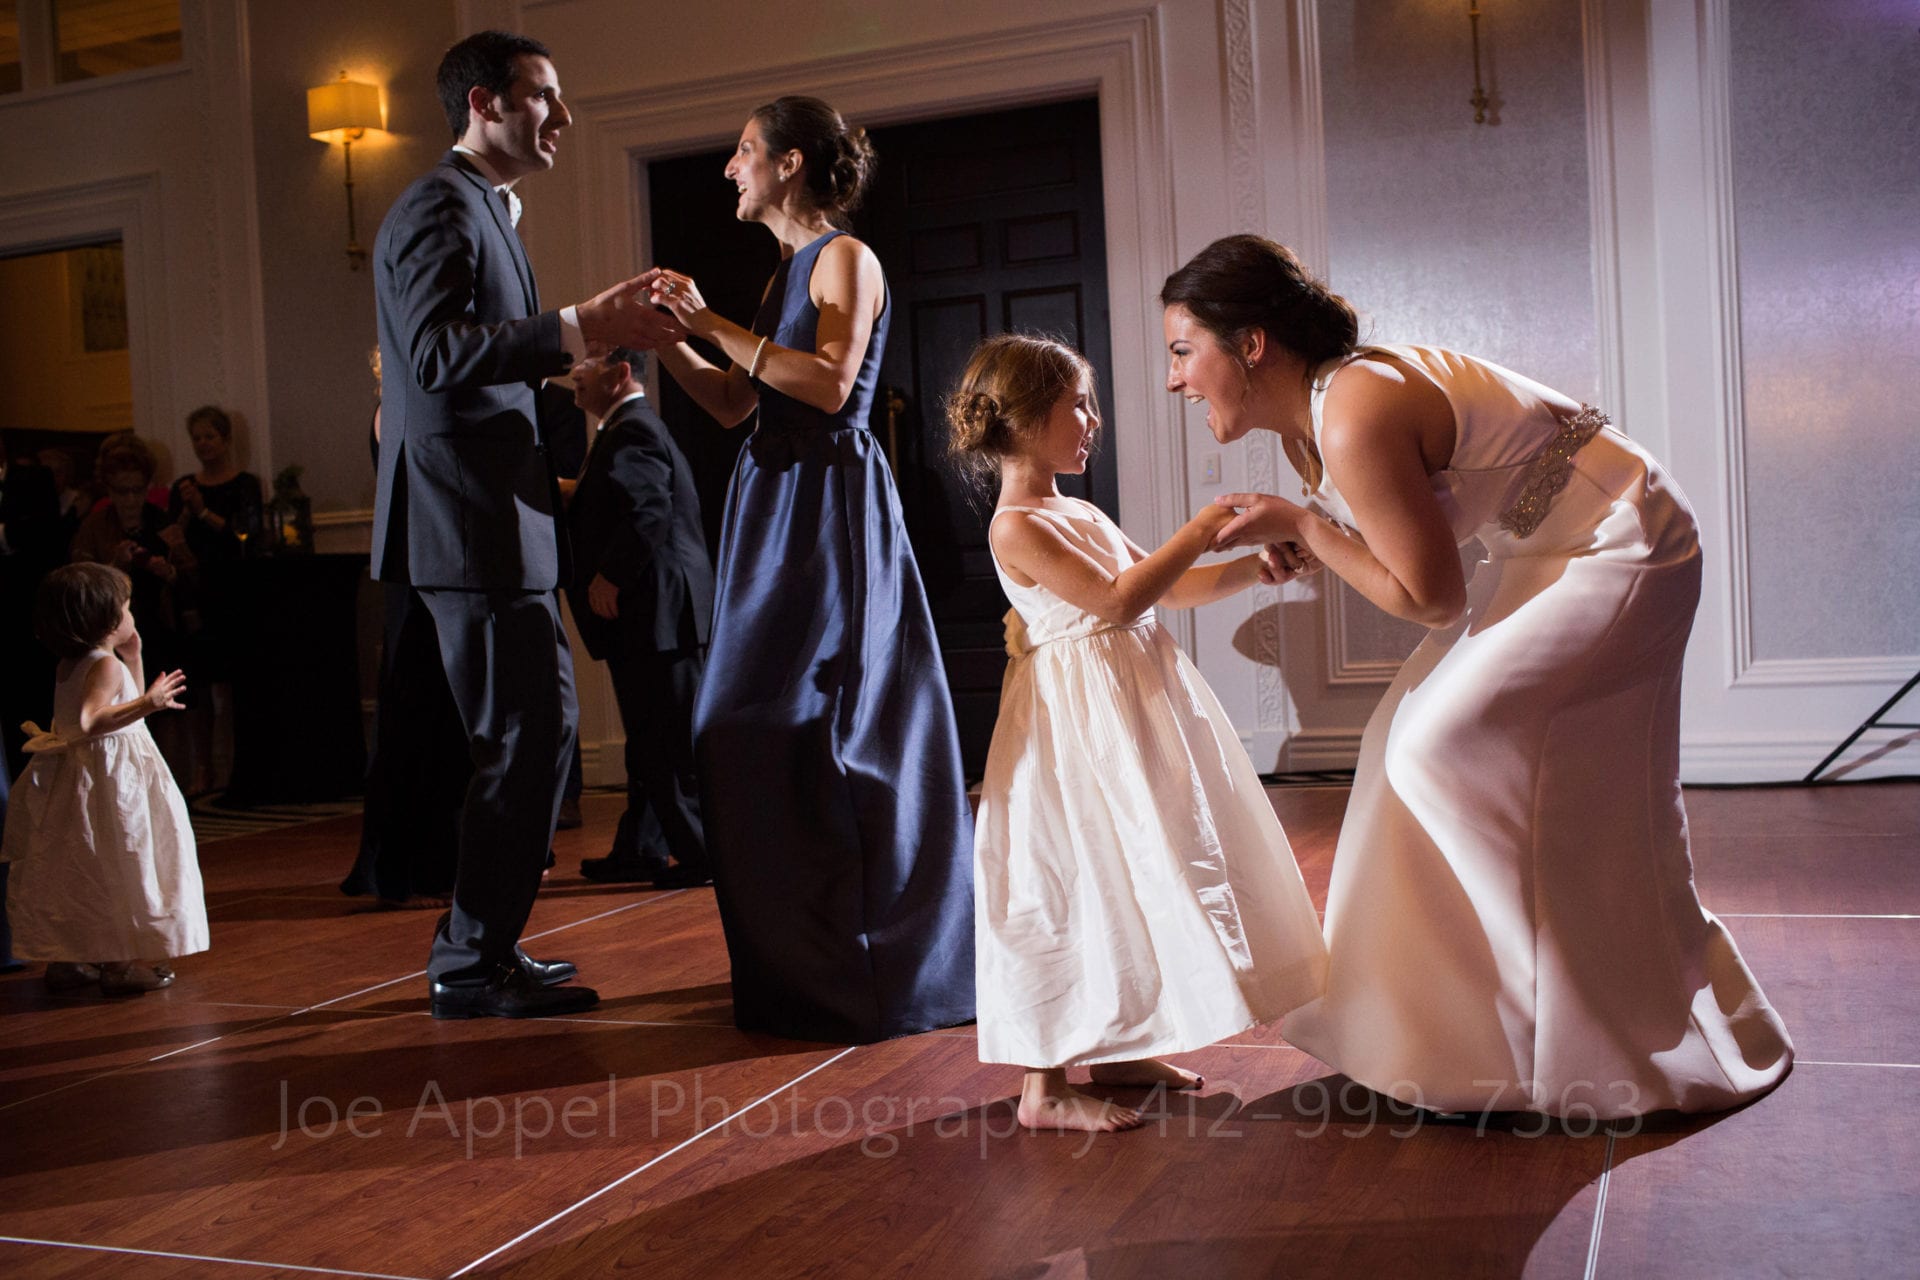 the bride dances with a little girl in a white dress